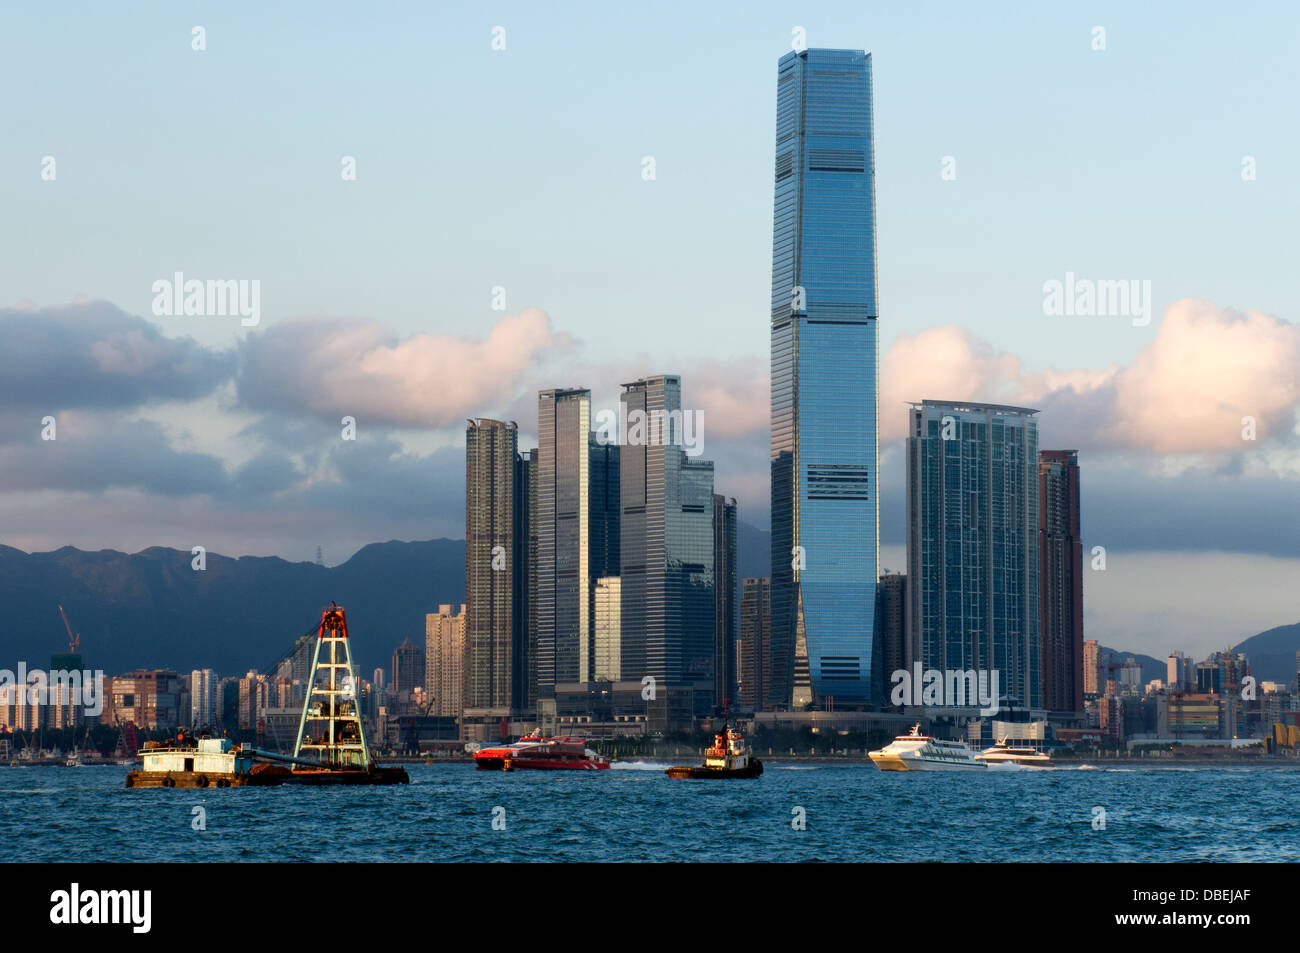 The new Kowloon skyline and Hong Kong's tallest building ...